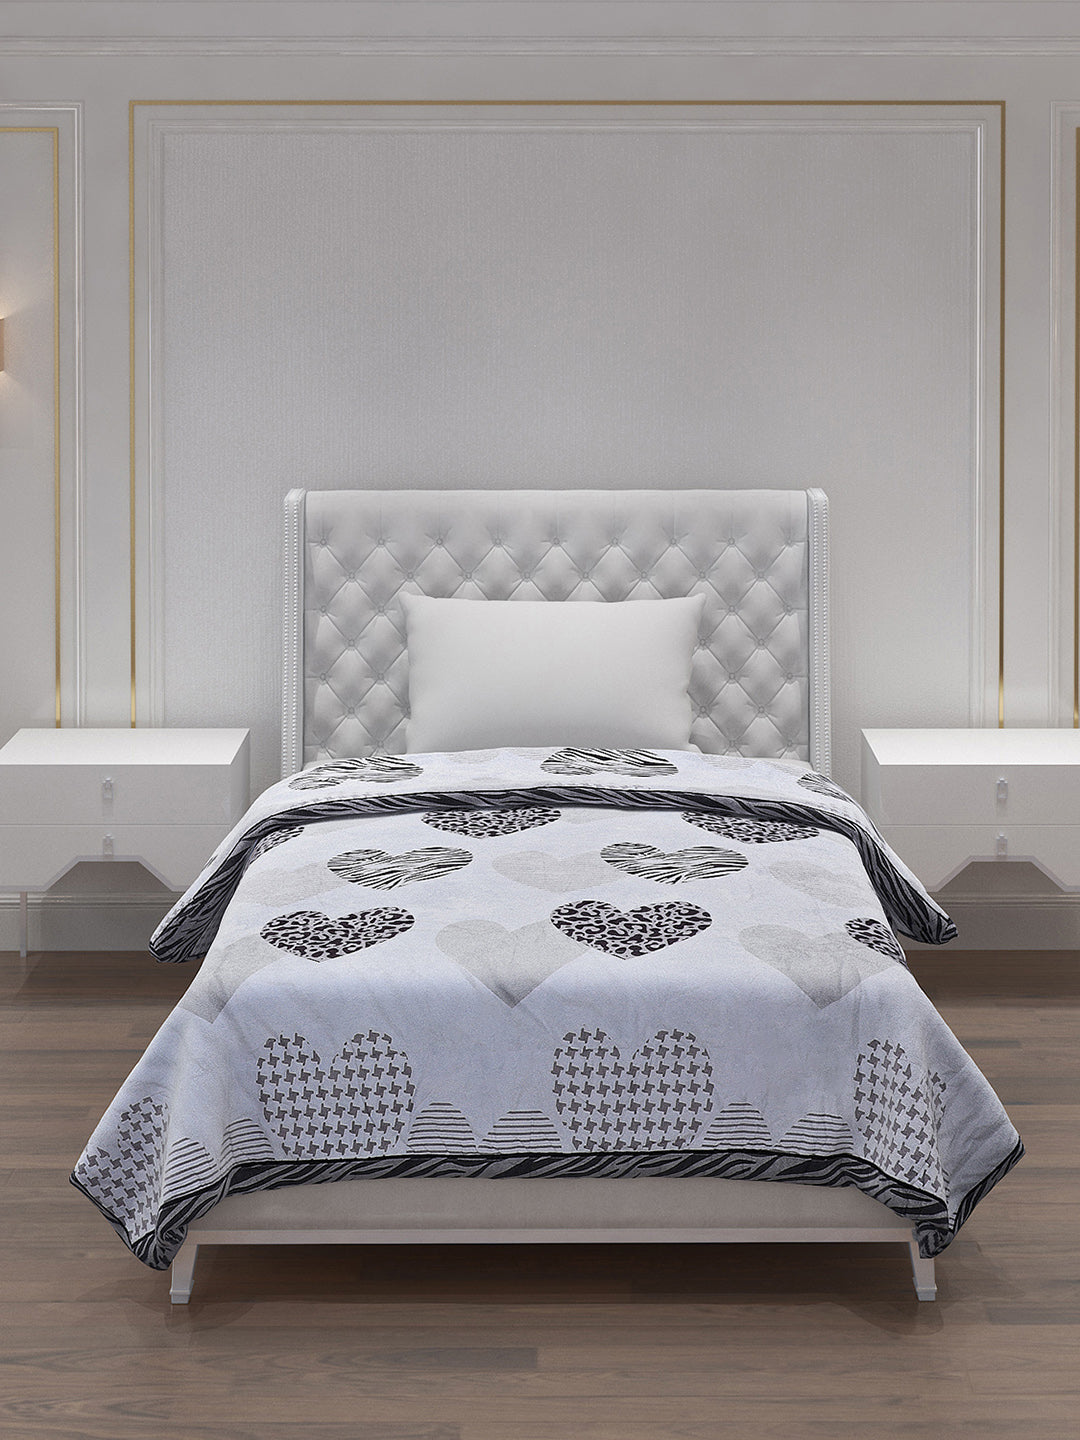 Printed 100% Polyster Single Bed Comforter for AC Room